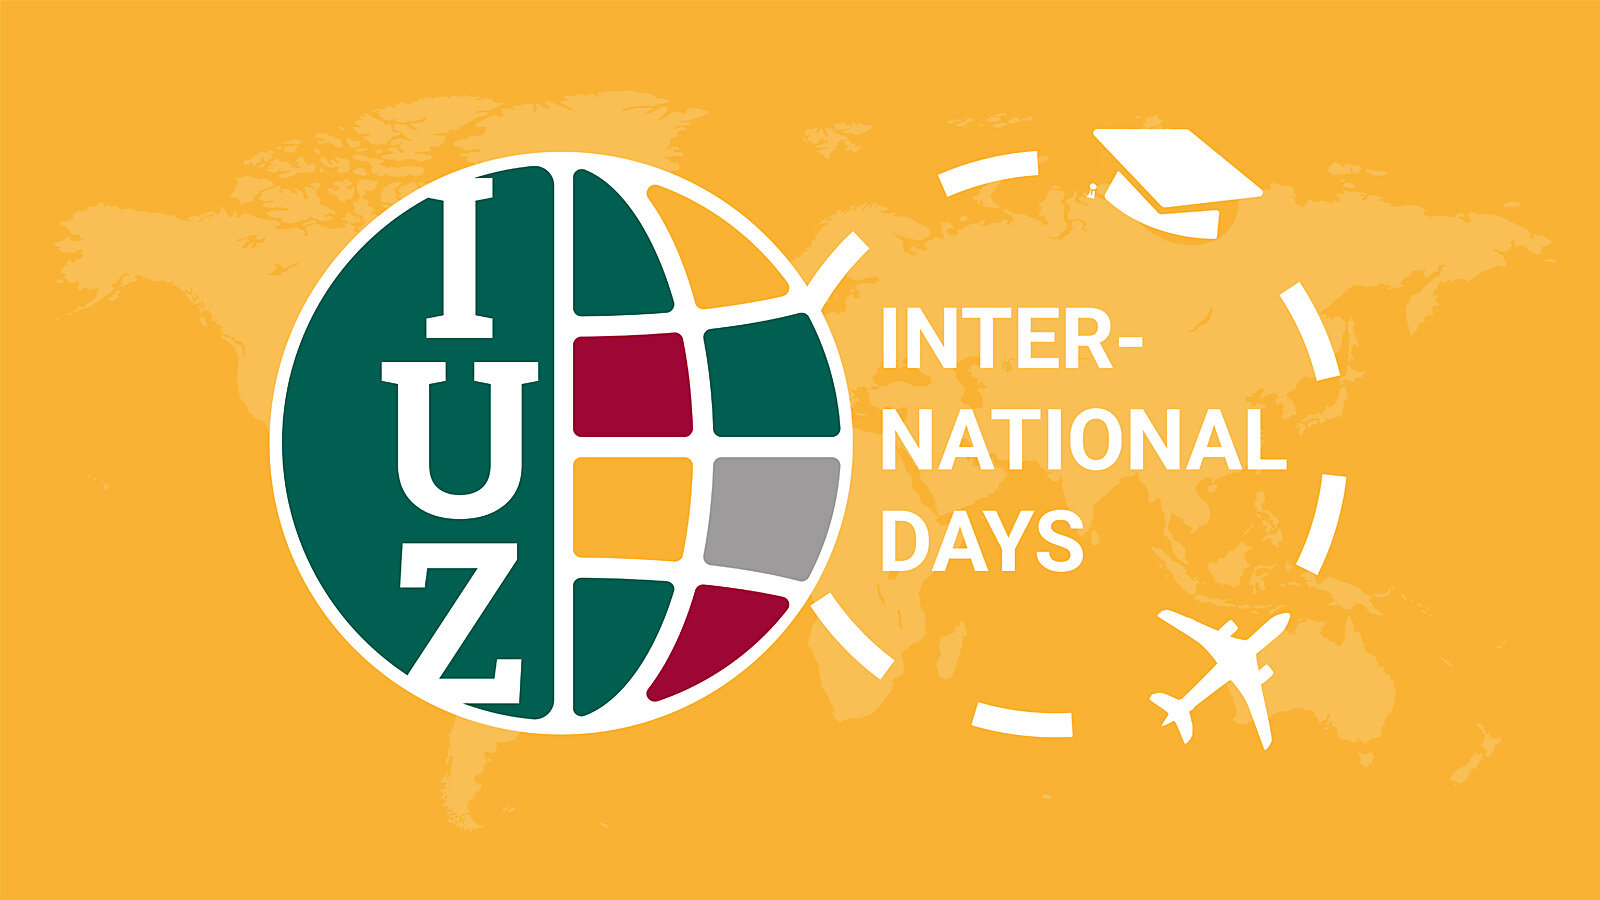 The characters IUZ and the text international days.